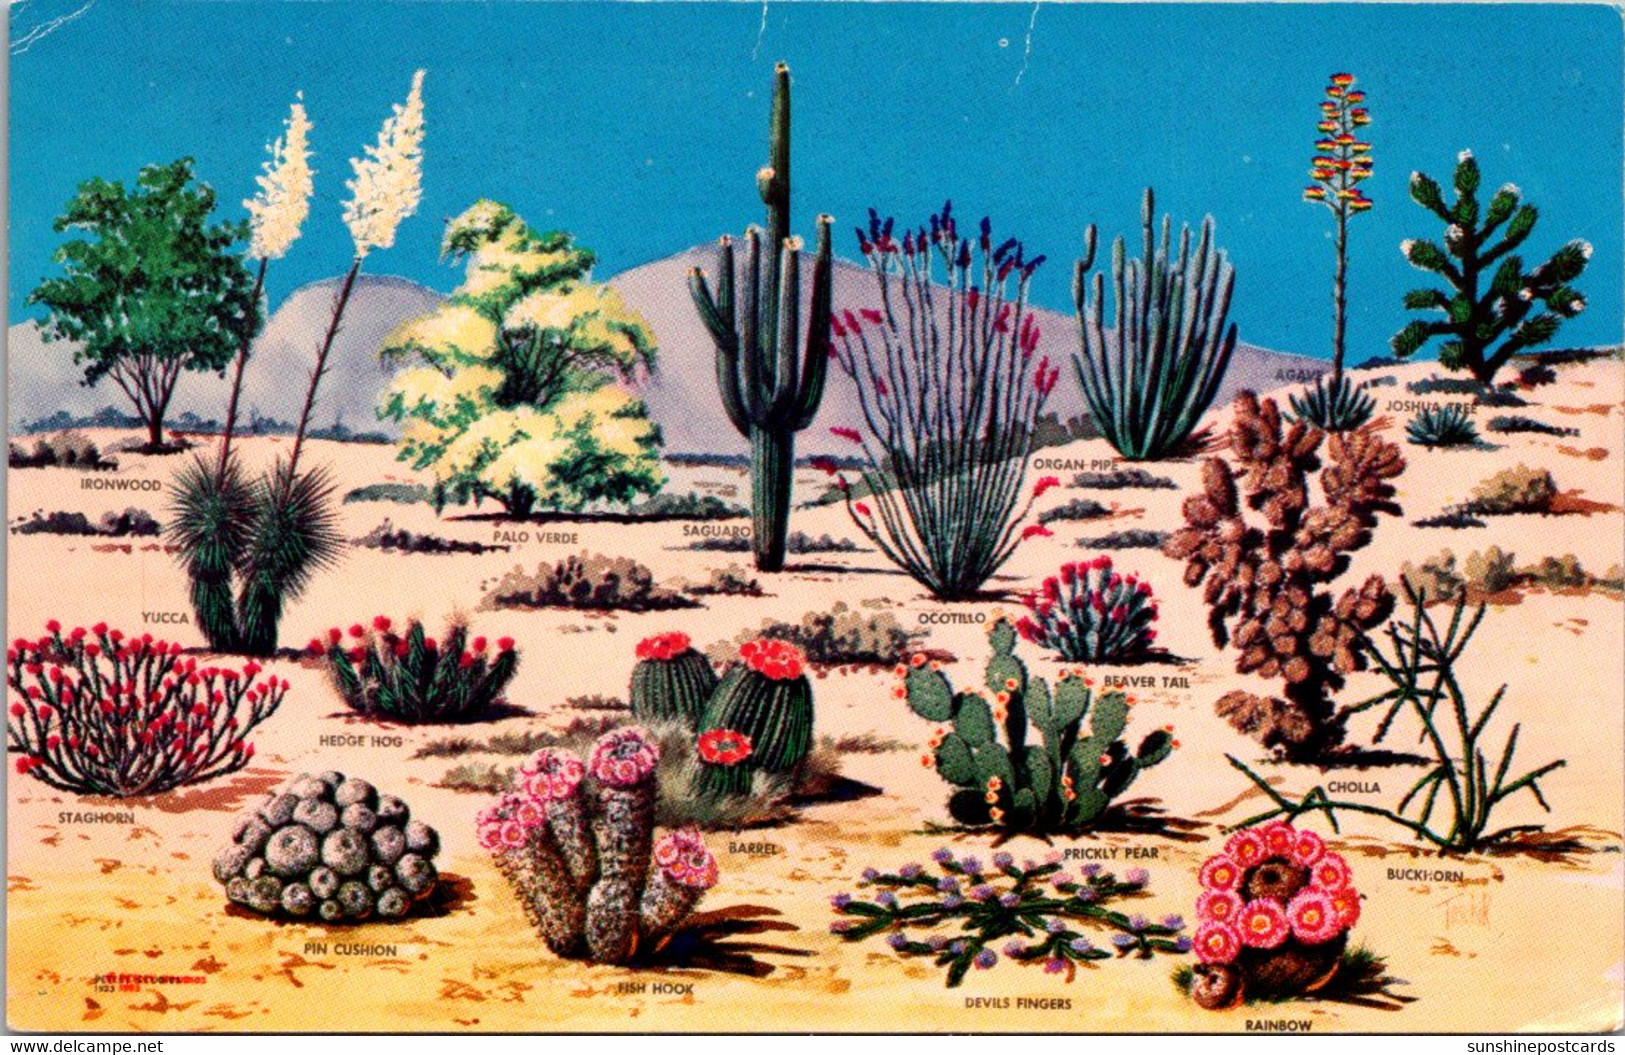 Cactus And Desert Flora Of The Great Southwest - Cactusses